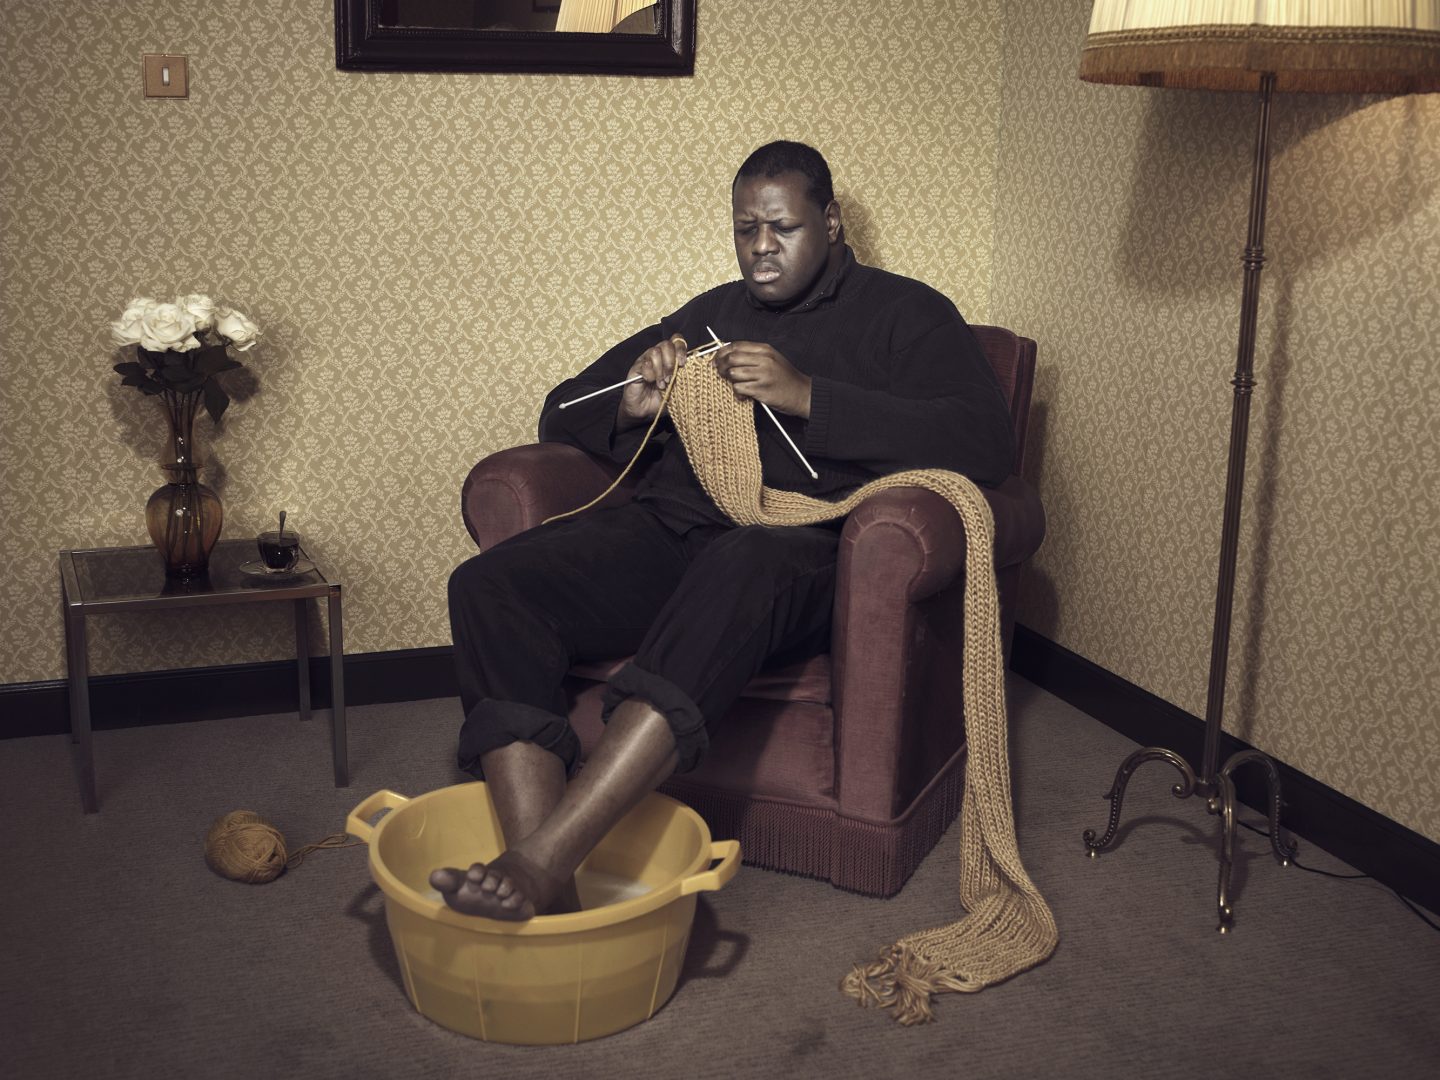 Black man sitting in armchair and knitting in room 42 by Stefan Rappo